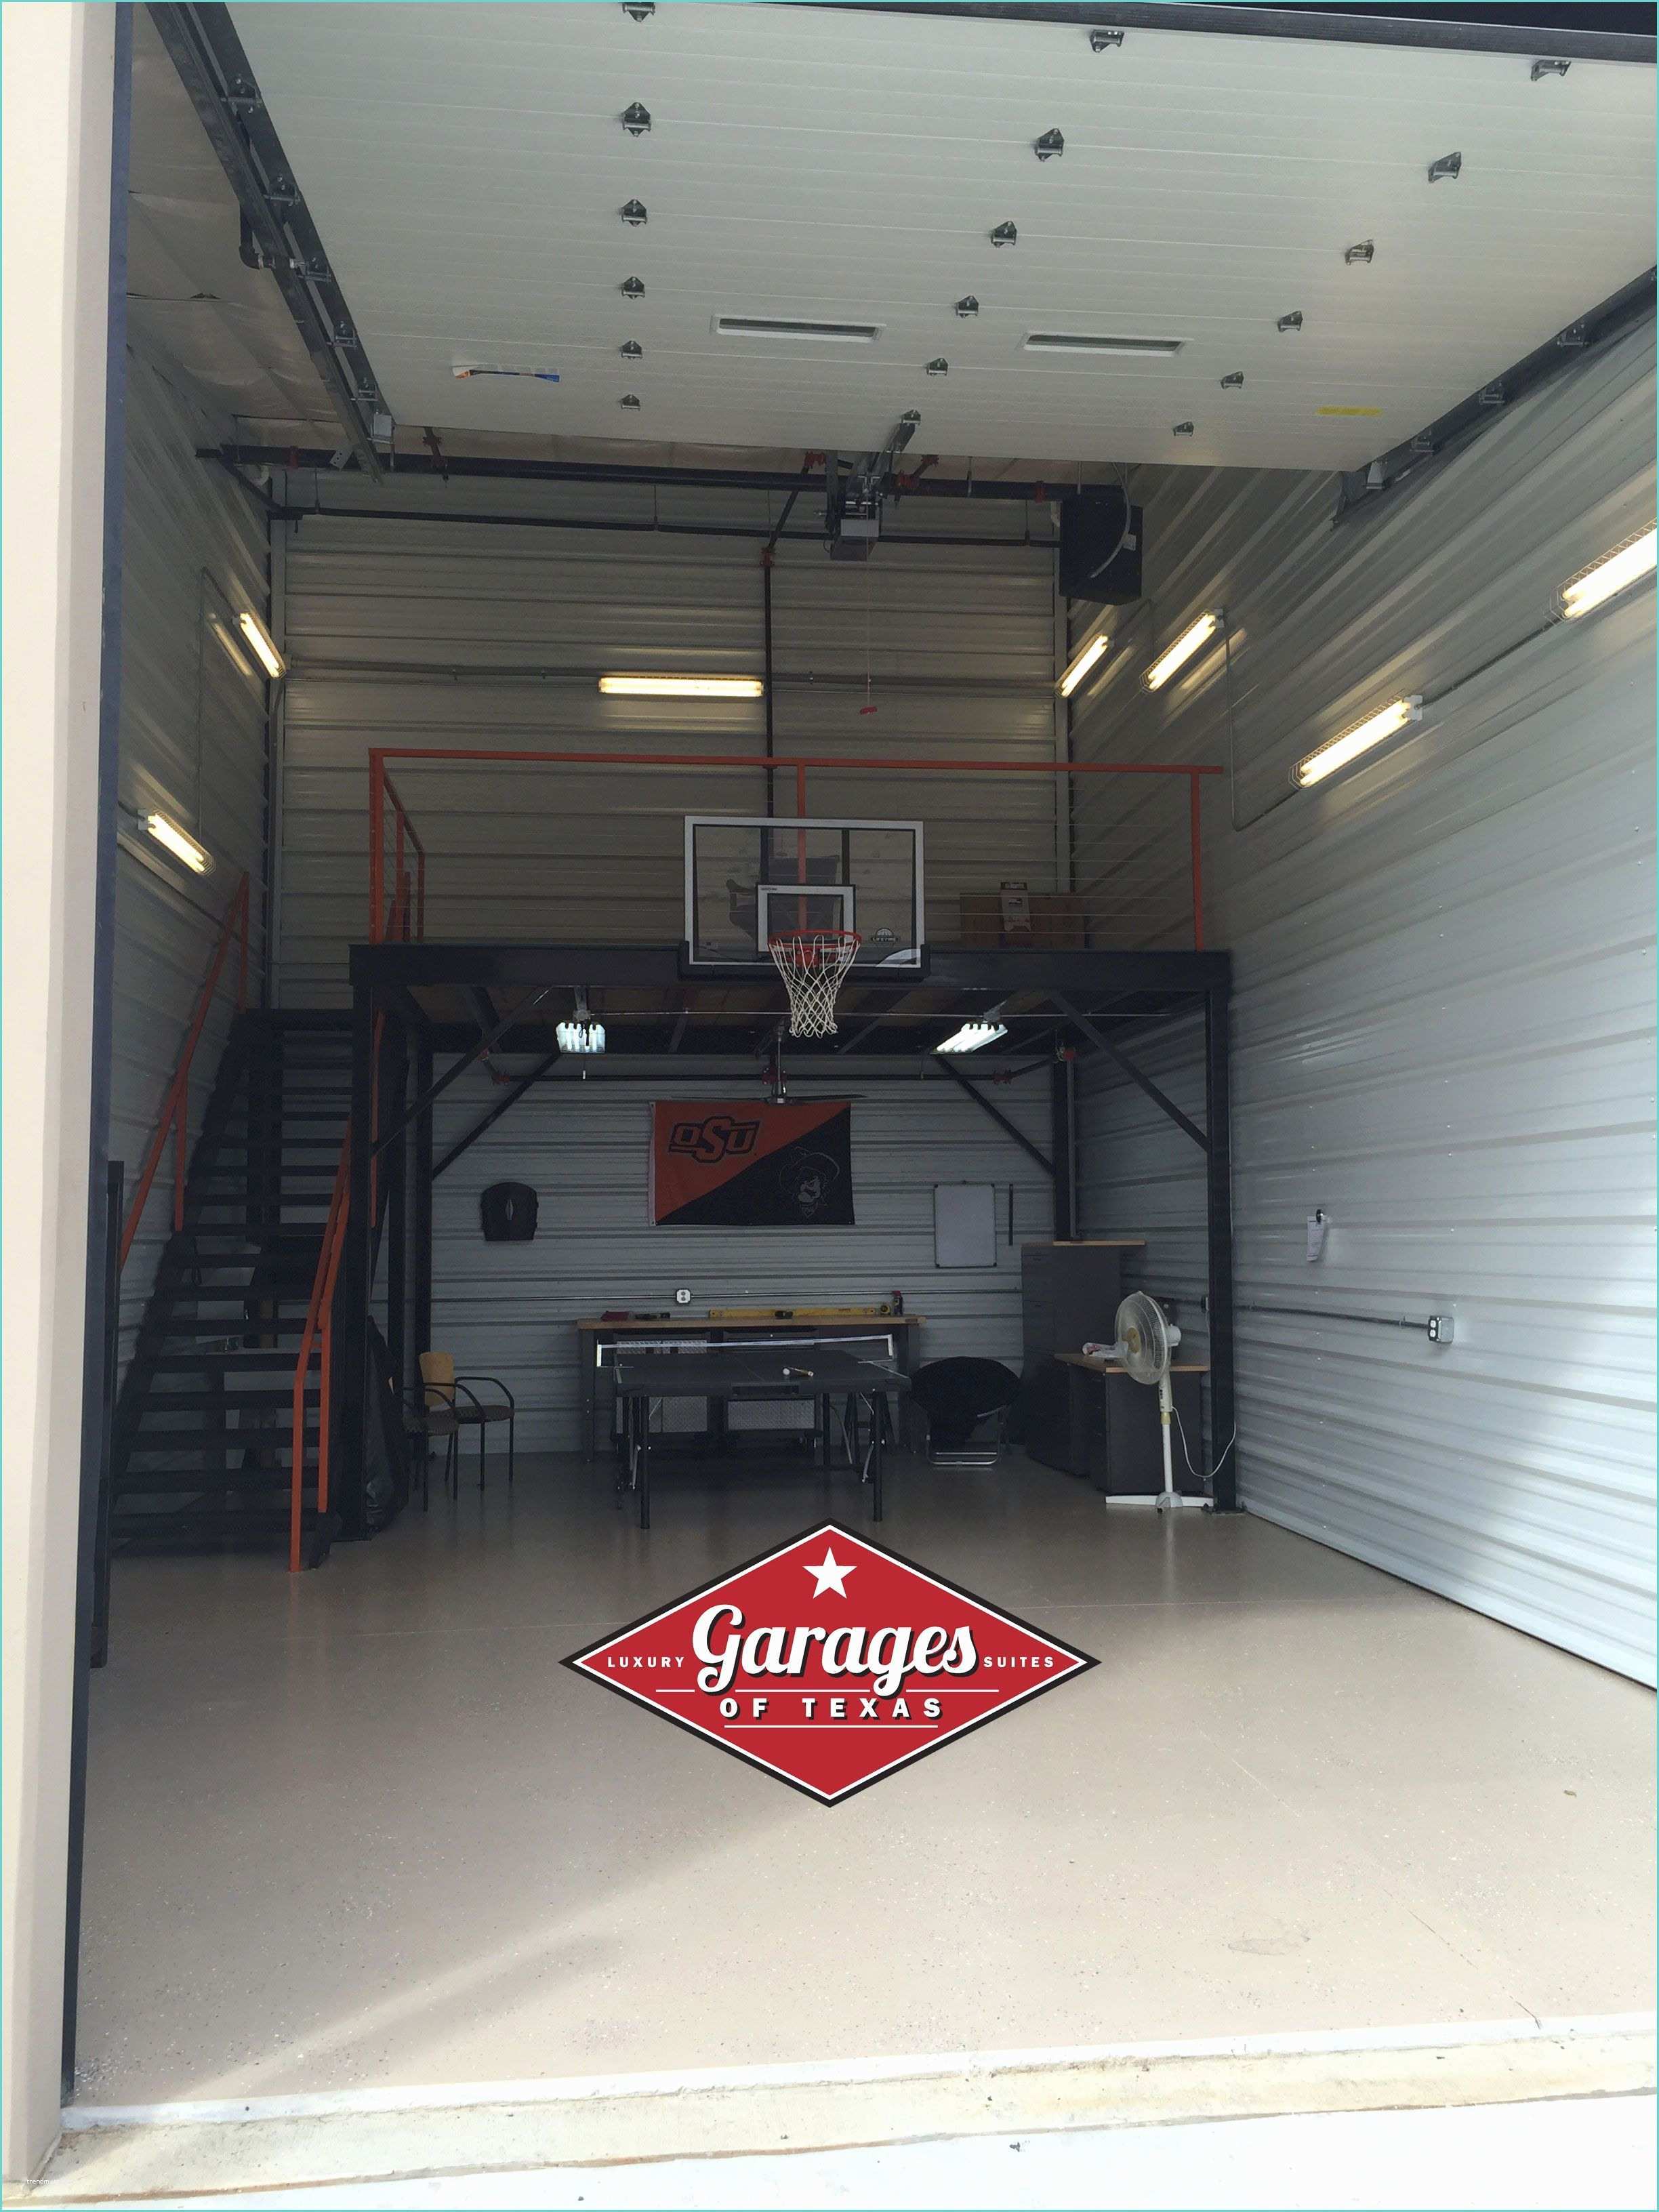 Garage Mezzanine Ideas This Person thought Of Everything with their Mancave